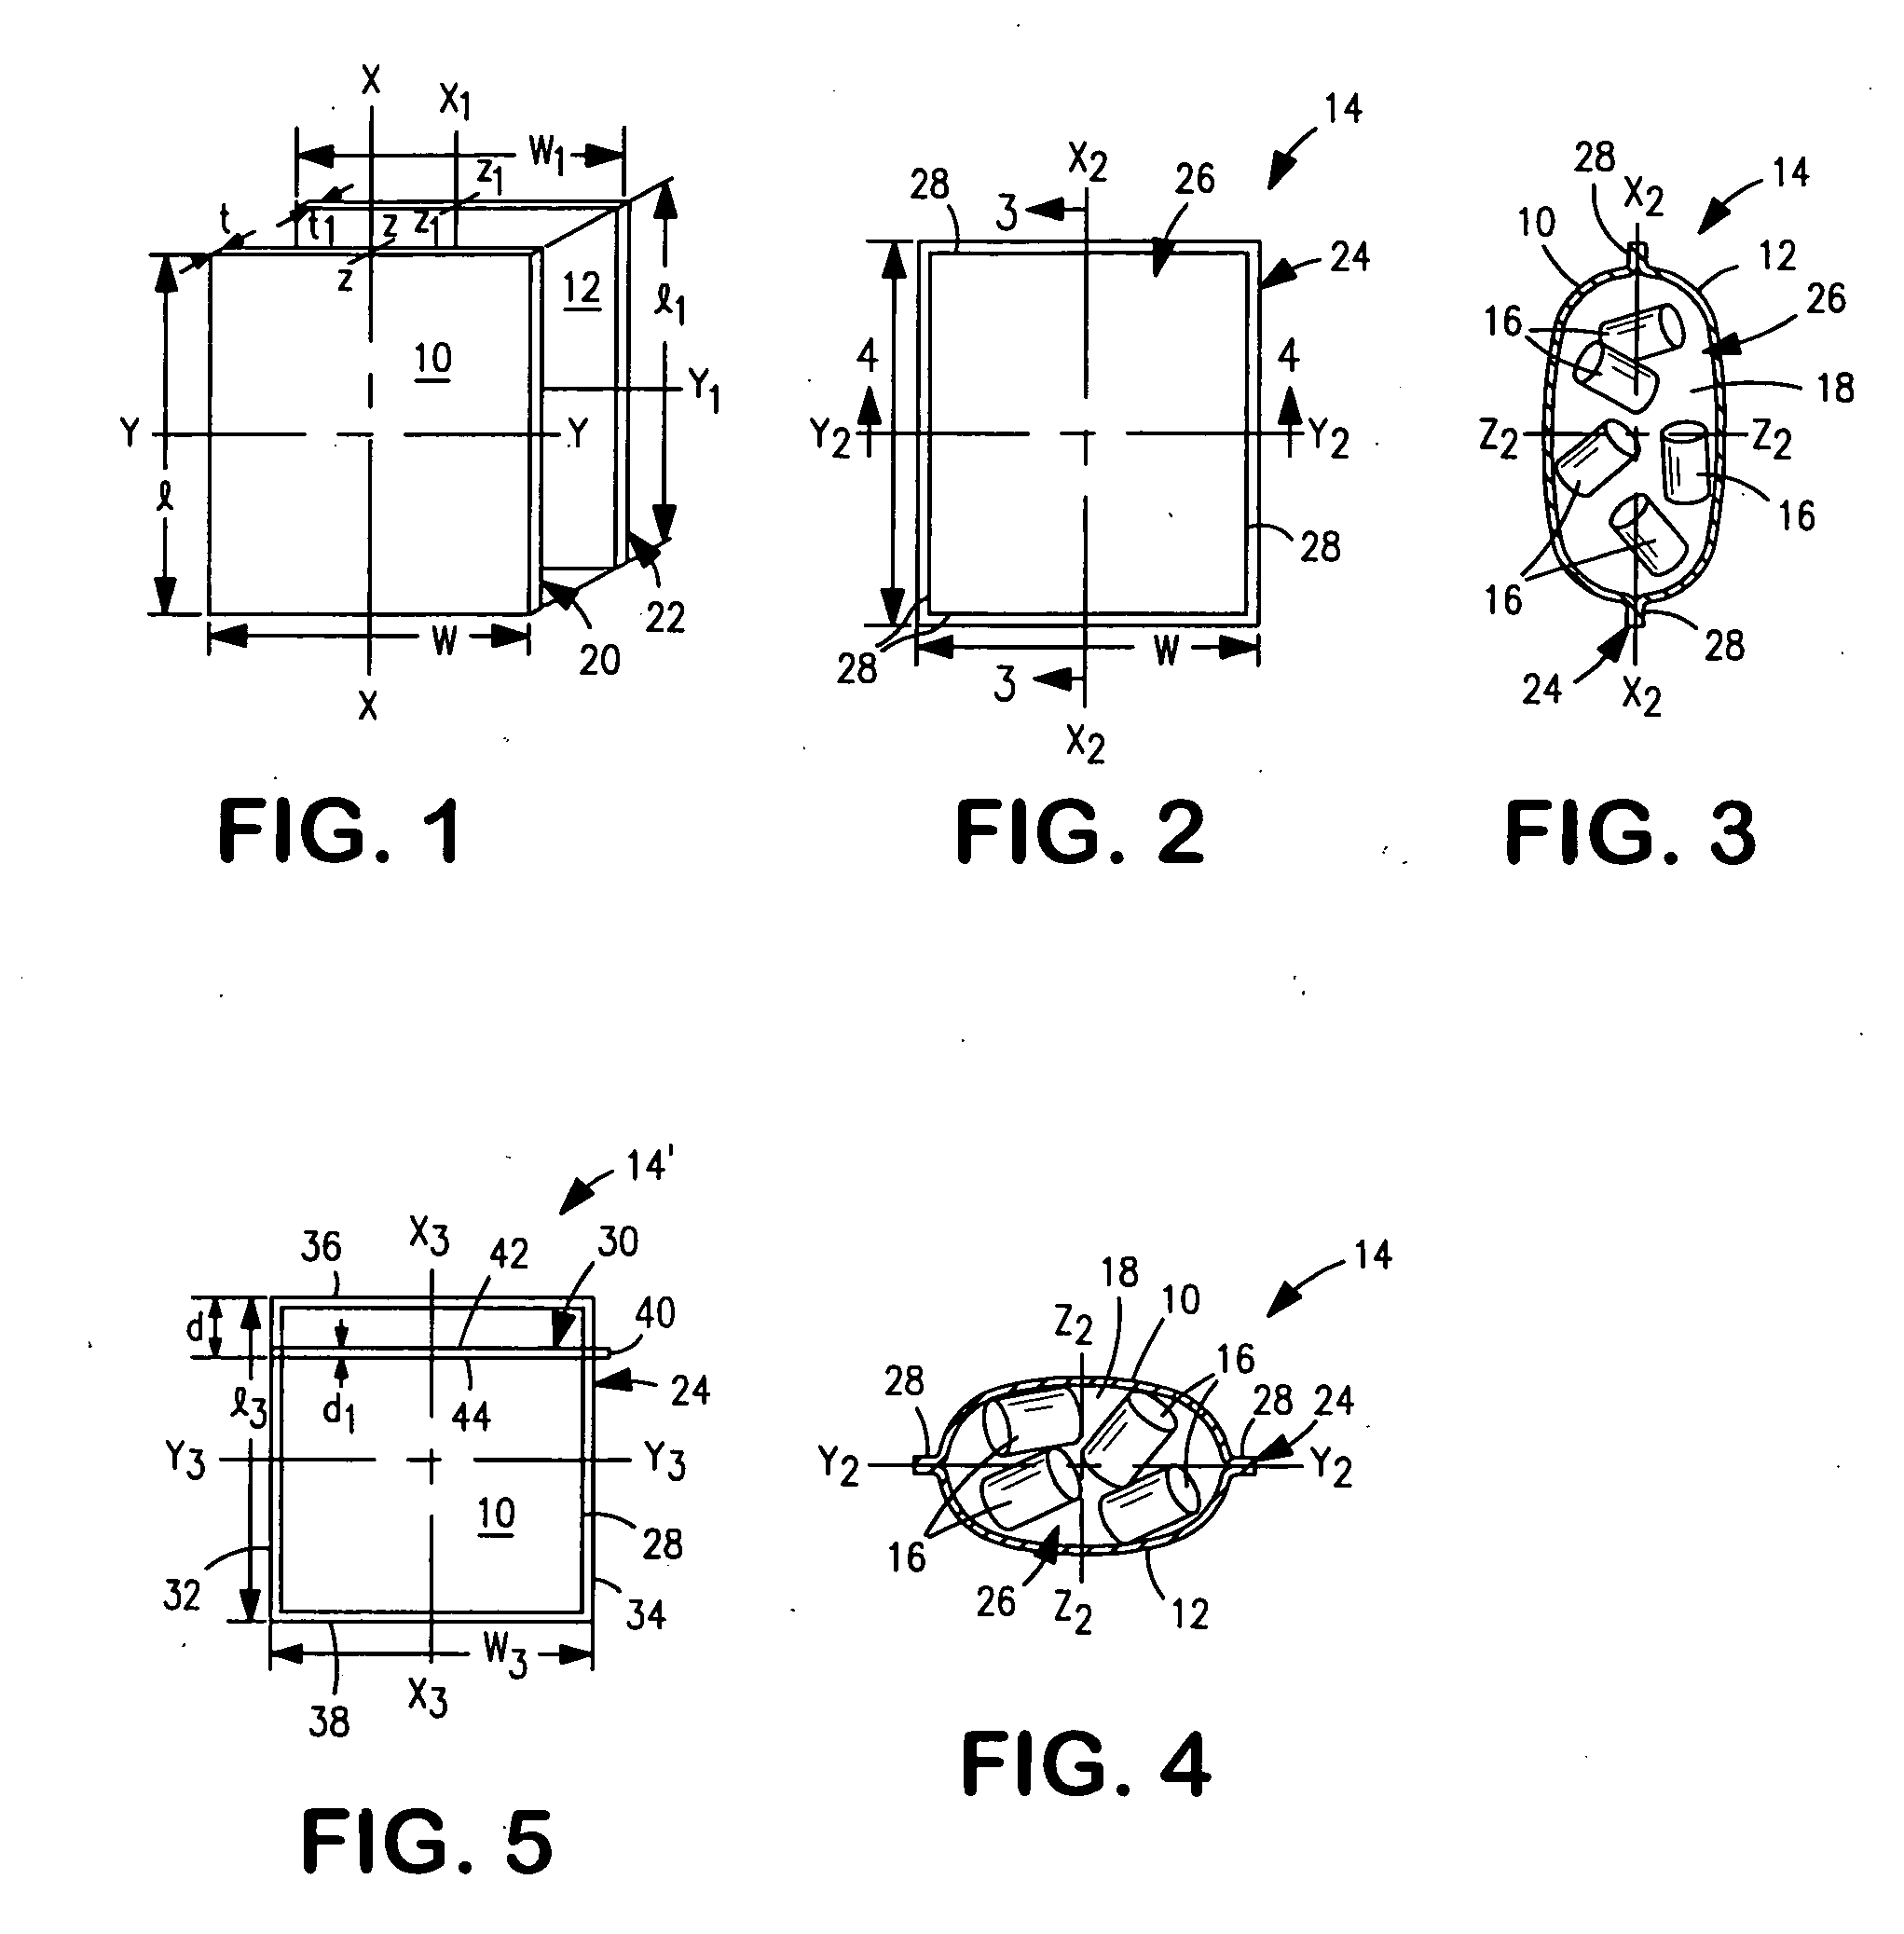 Method of forming a pre-packaged, flexible container of ice and air